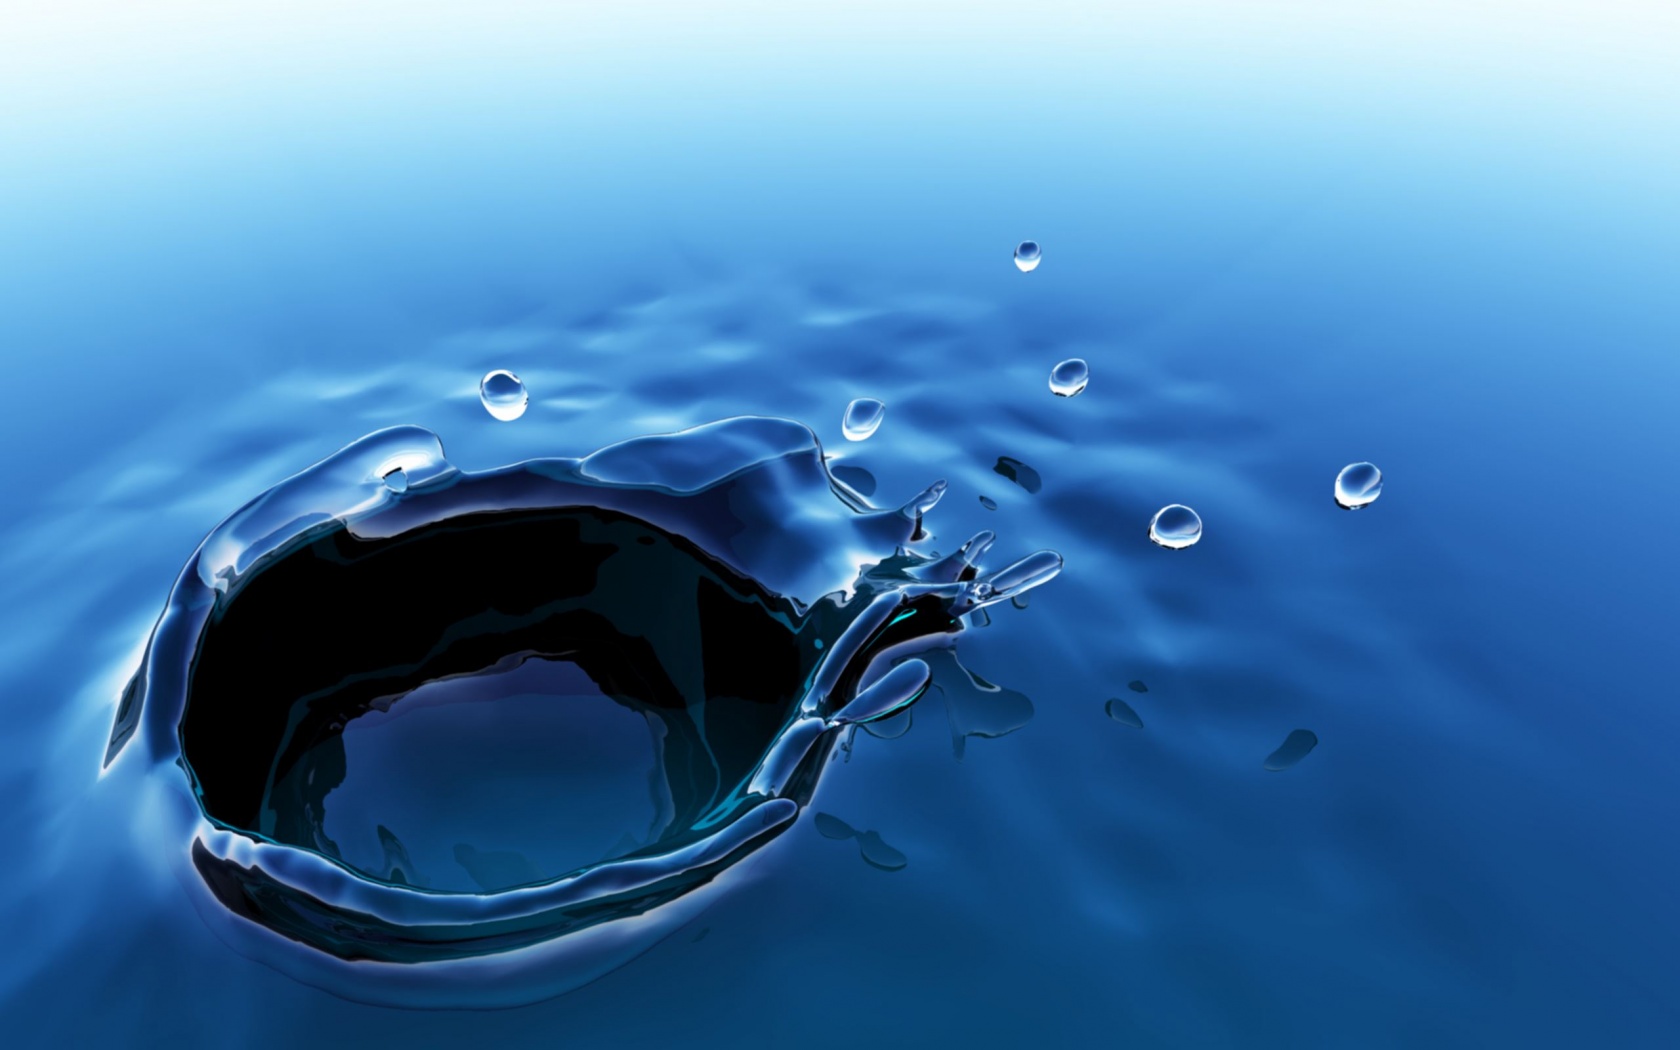  download 3d water background wallpaper cool 3d water 1680x1050